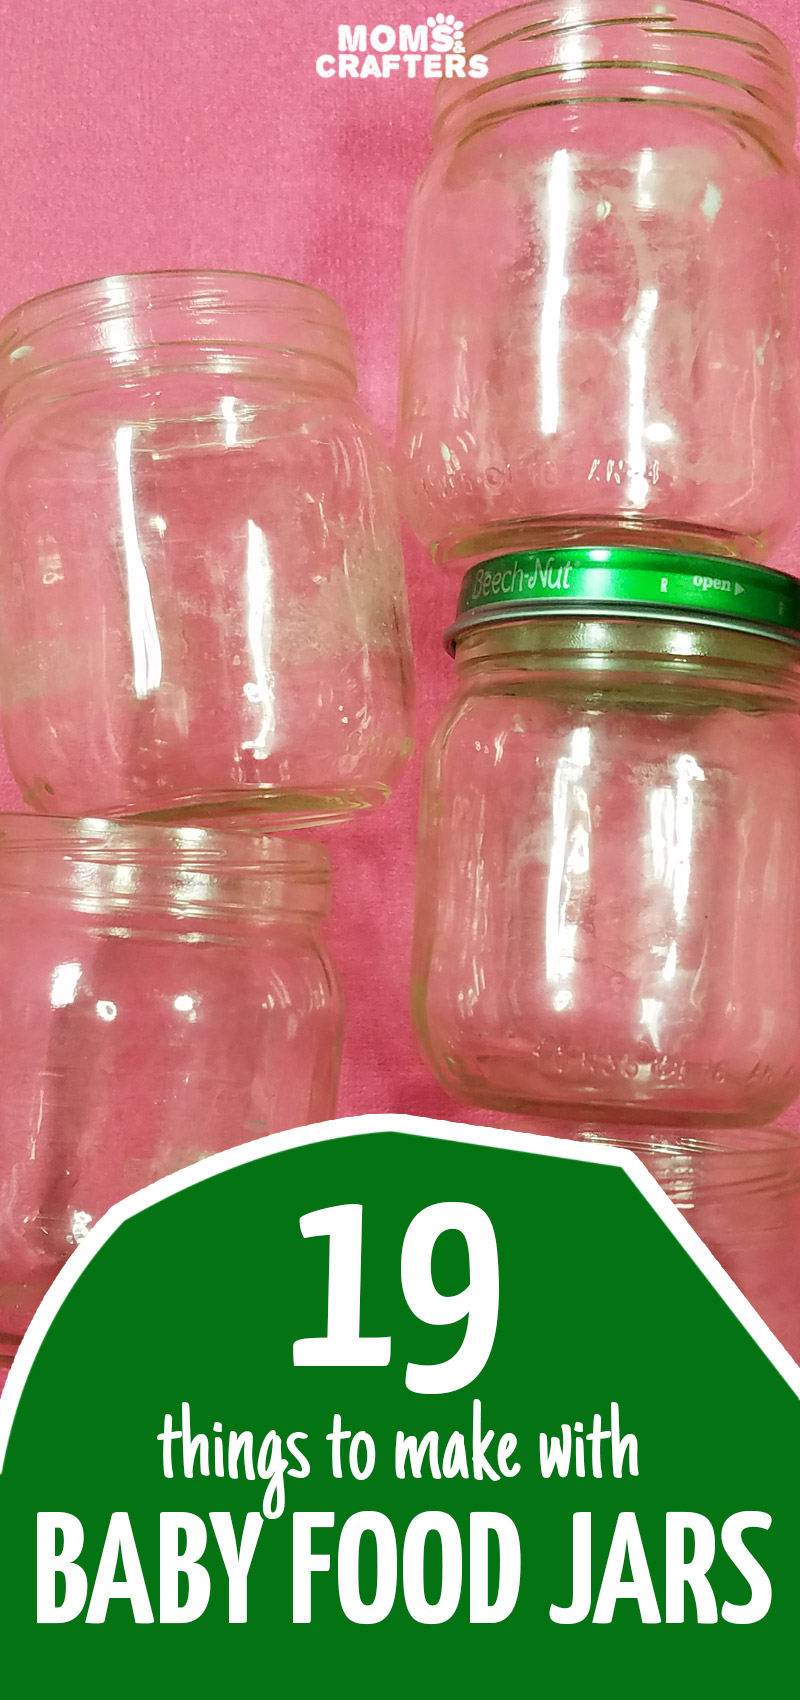 If you're looking for cool things to make with baby food jars, this list is perfect for you! You'll find easy recycled jar crafts for moms, teens, kids, and even toddlers!